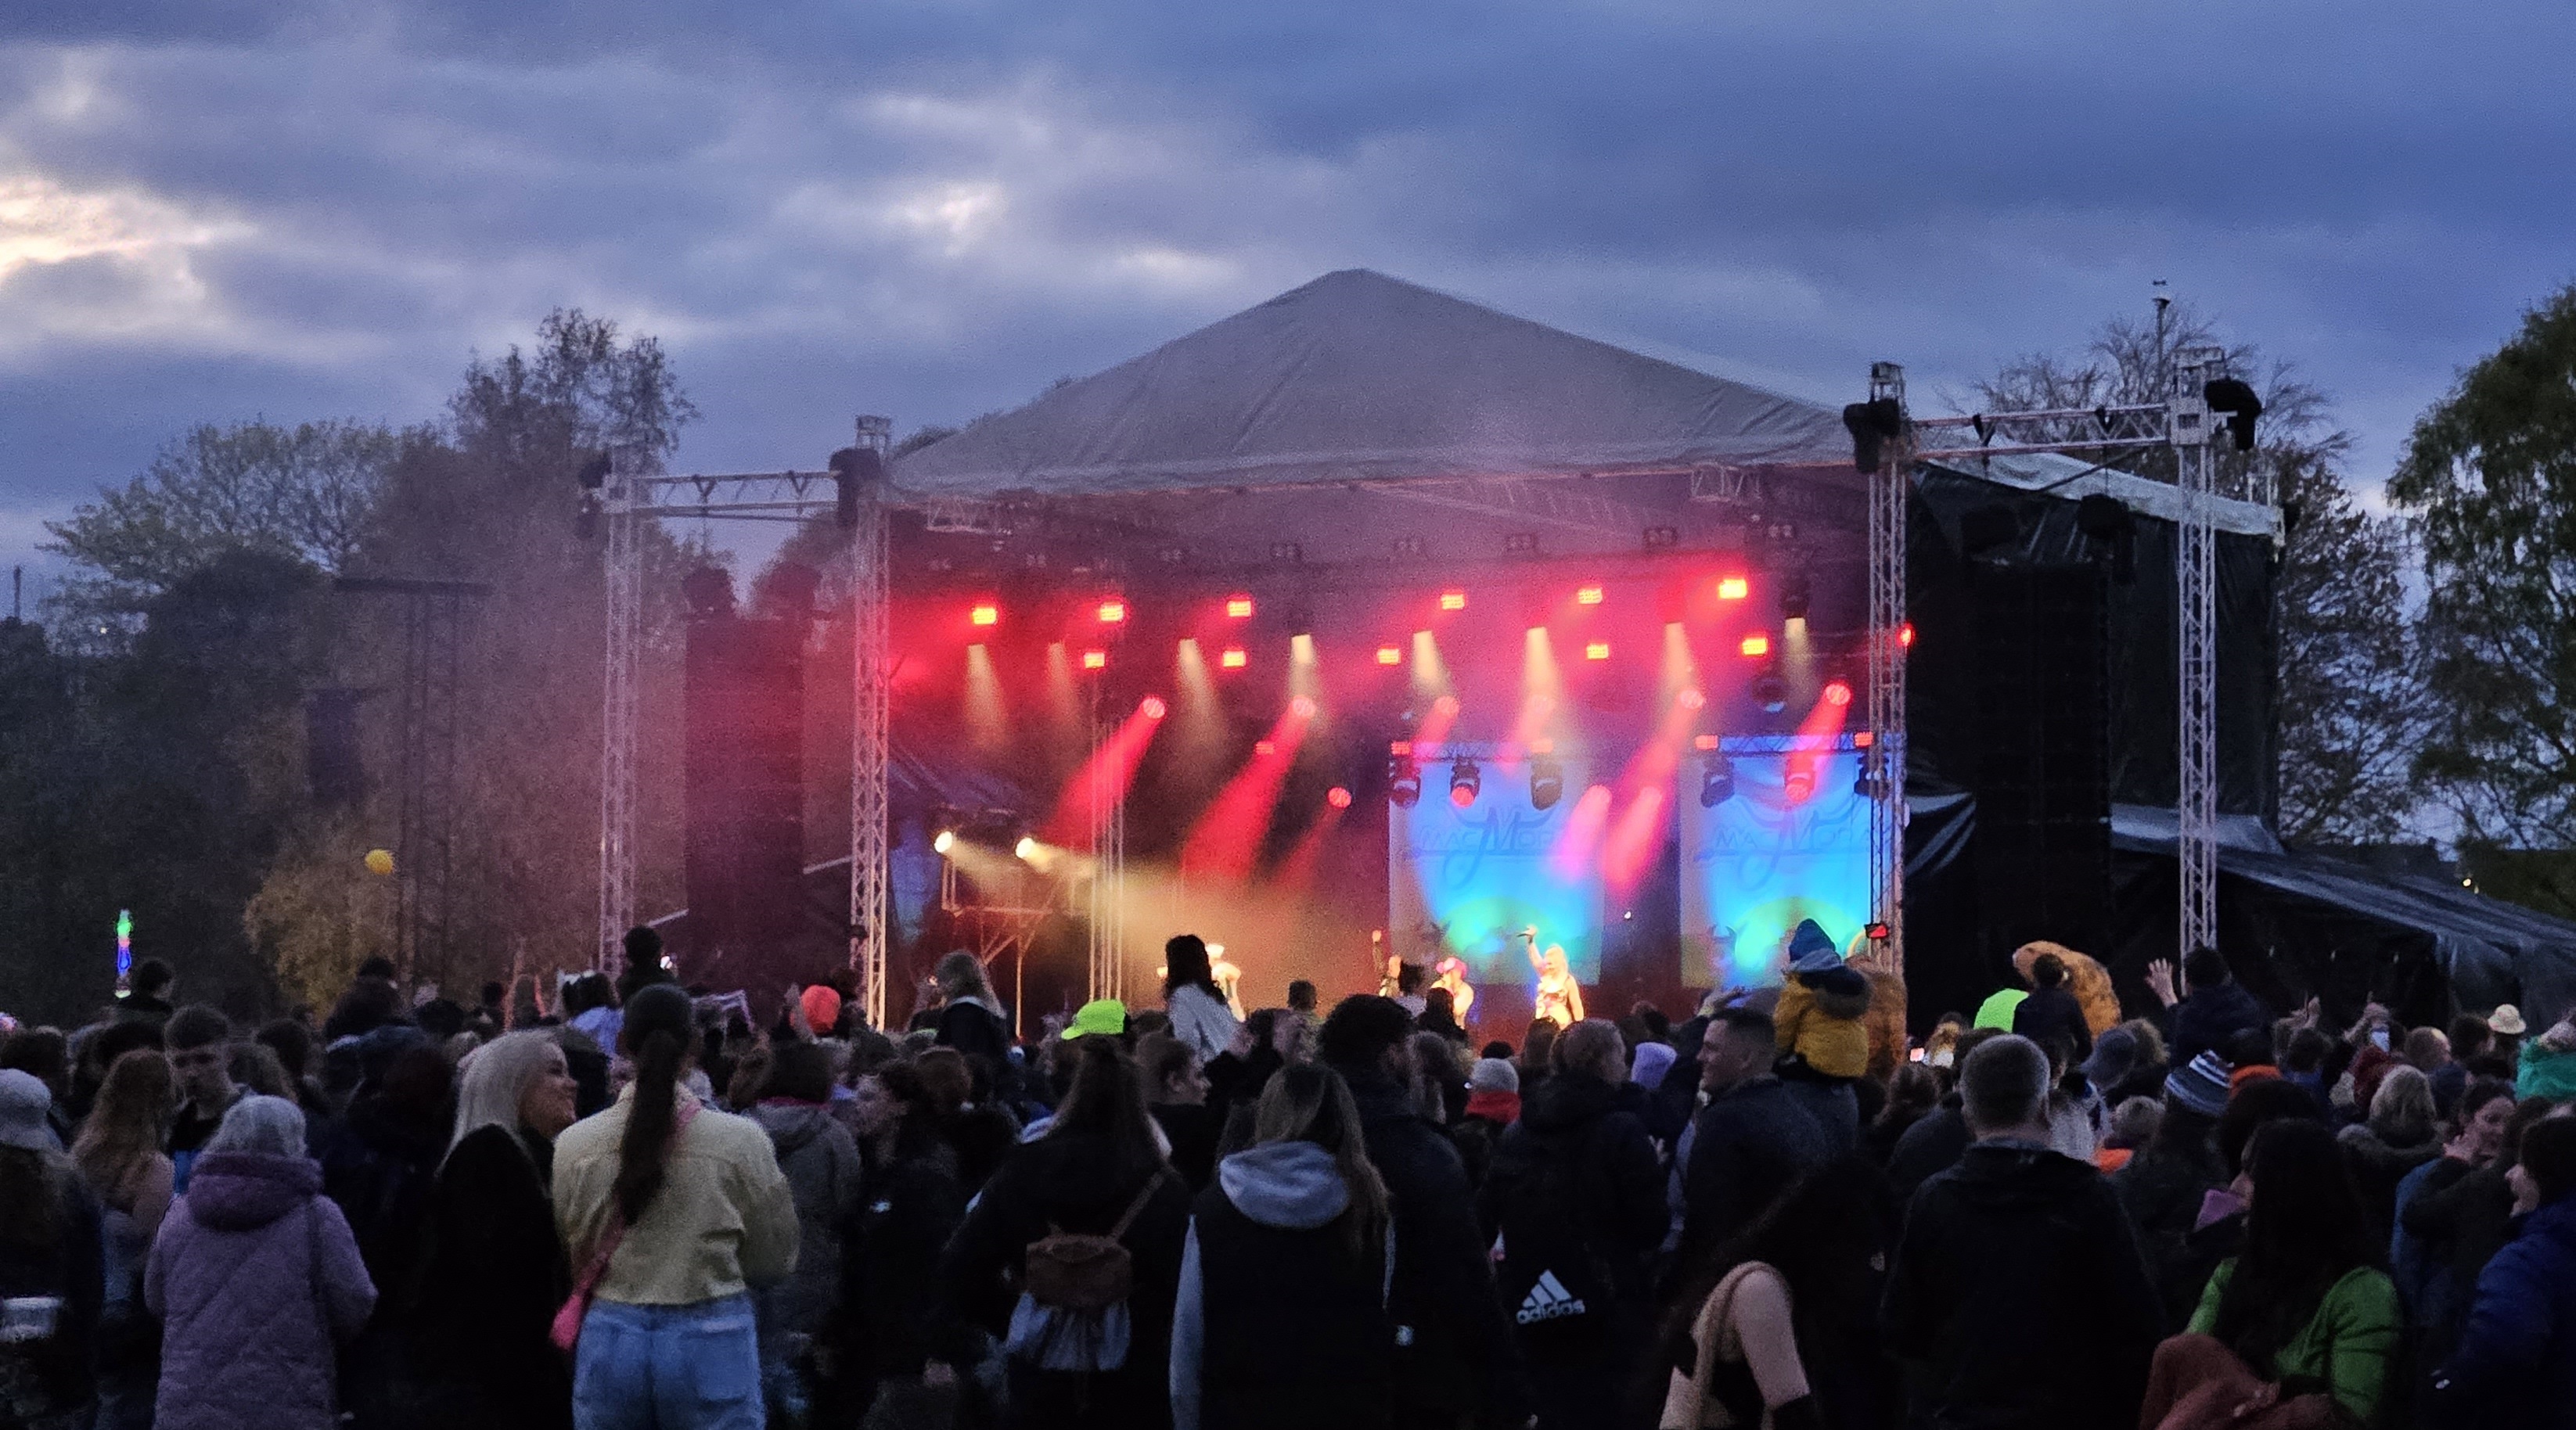 Photograph of the main stage at MacMoray 2023 with a lively crowd